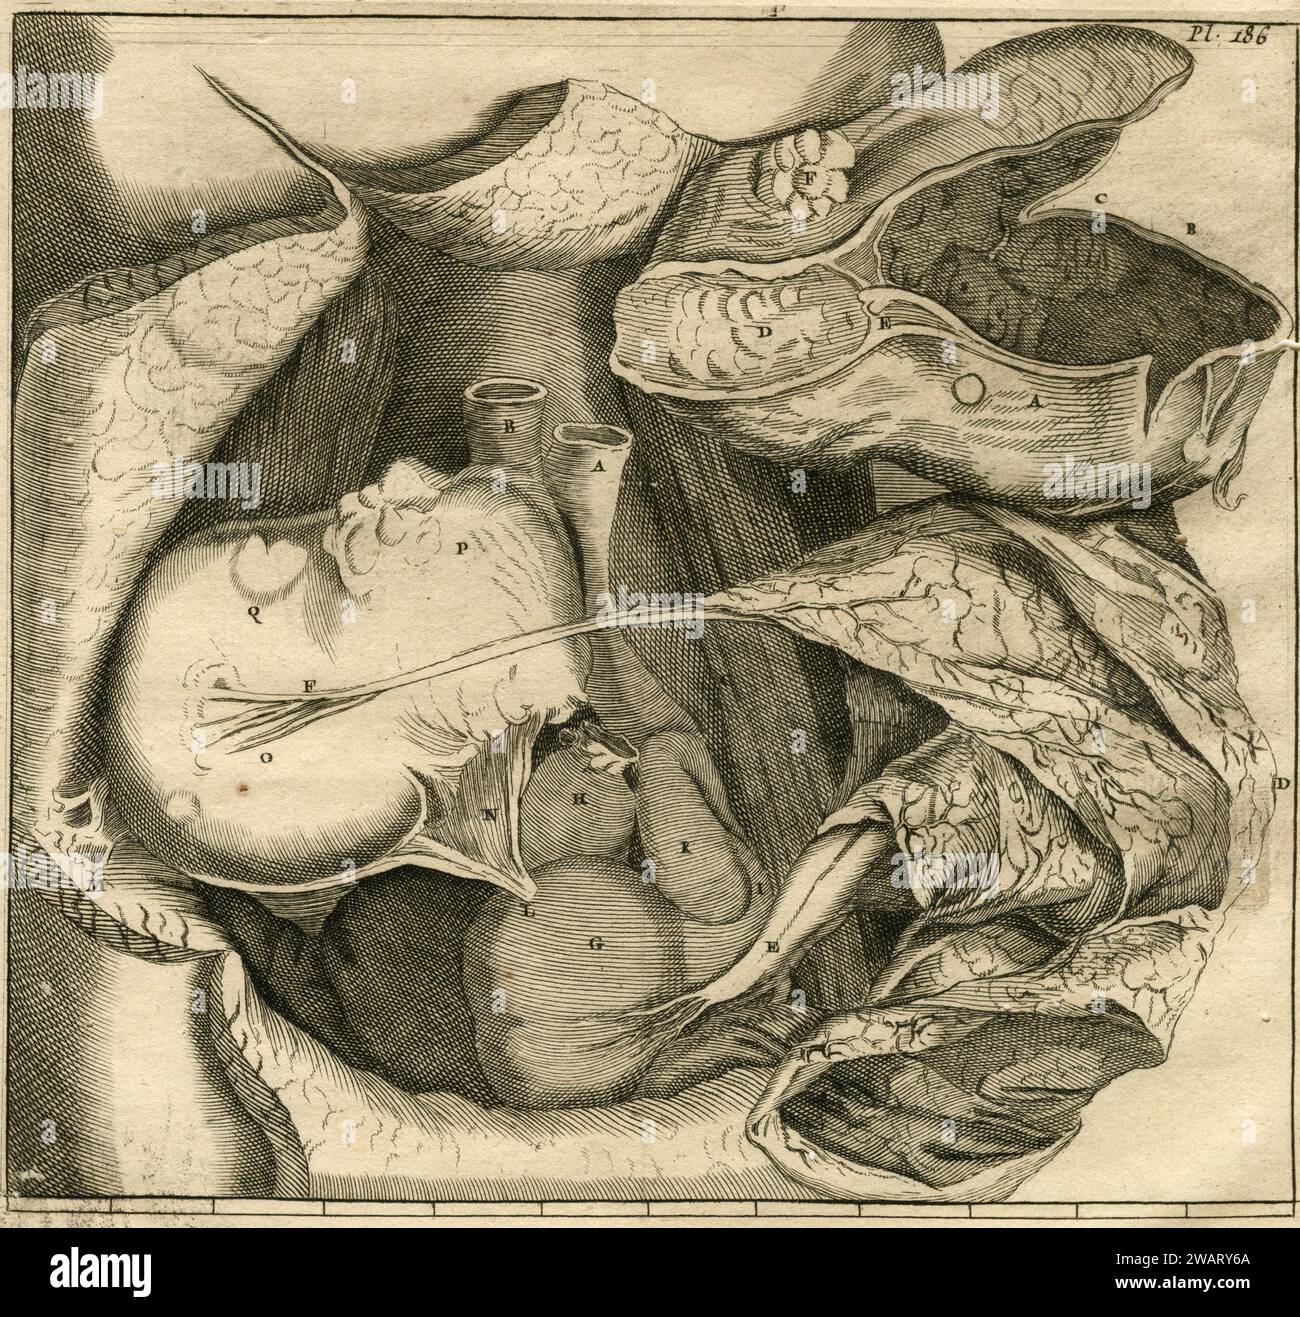 Vintage anatomy drawing: Human dissection, Transation Philosophique, France 1700s Stock Photo